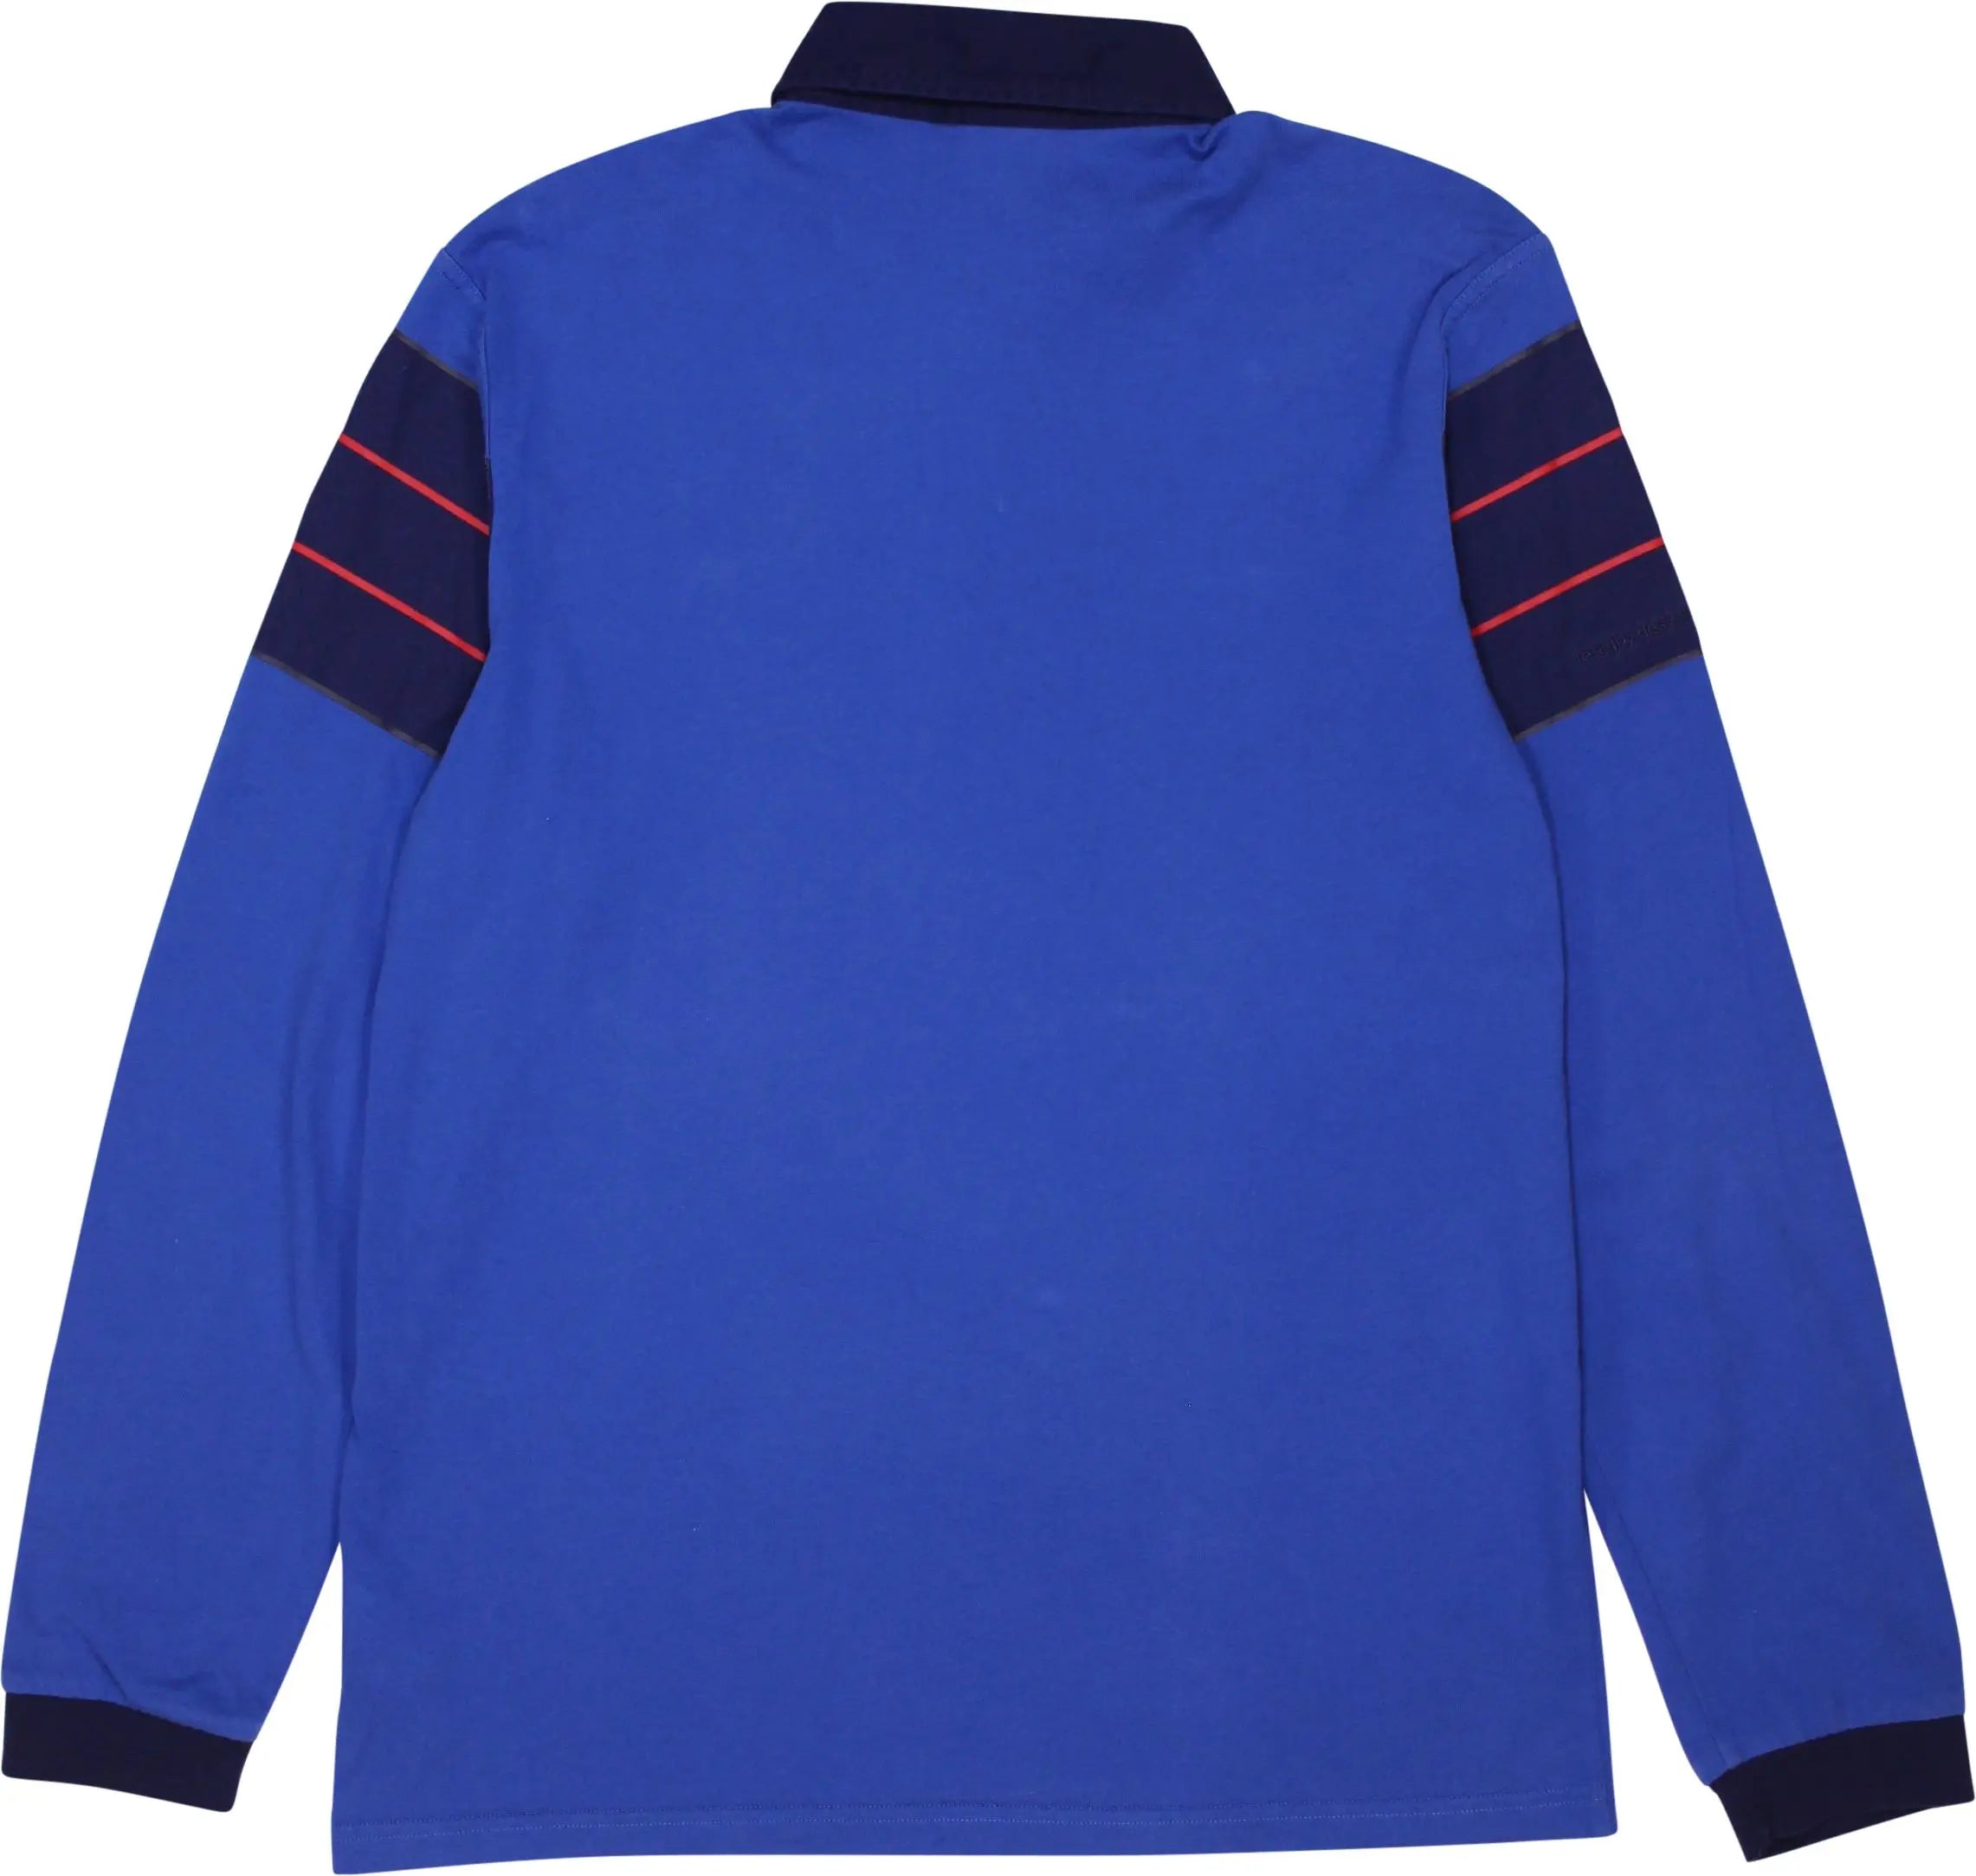 Adidas - 90s Rugby Equipe de France FFR Jersey Shirt by Adidas- ThriftTale.com - Vintage and second handclothing